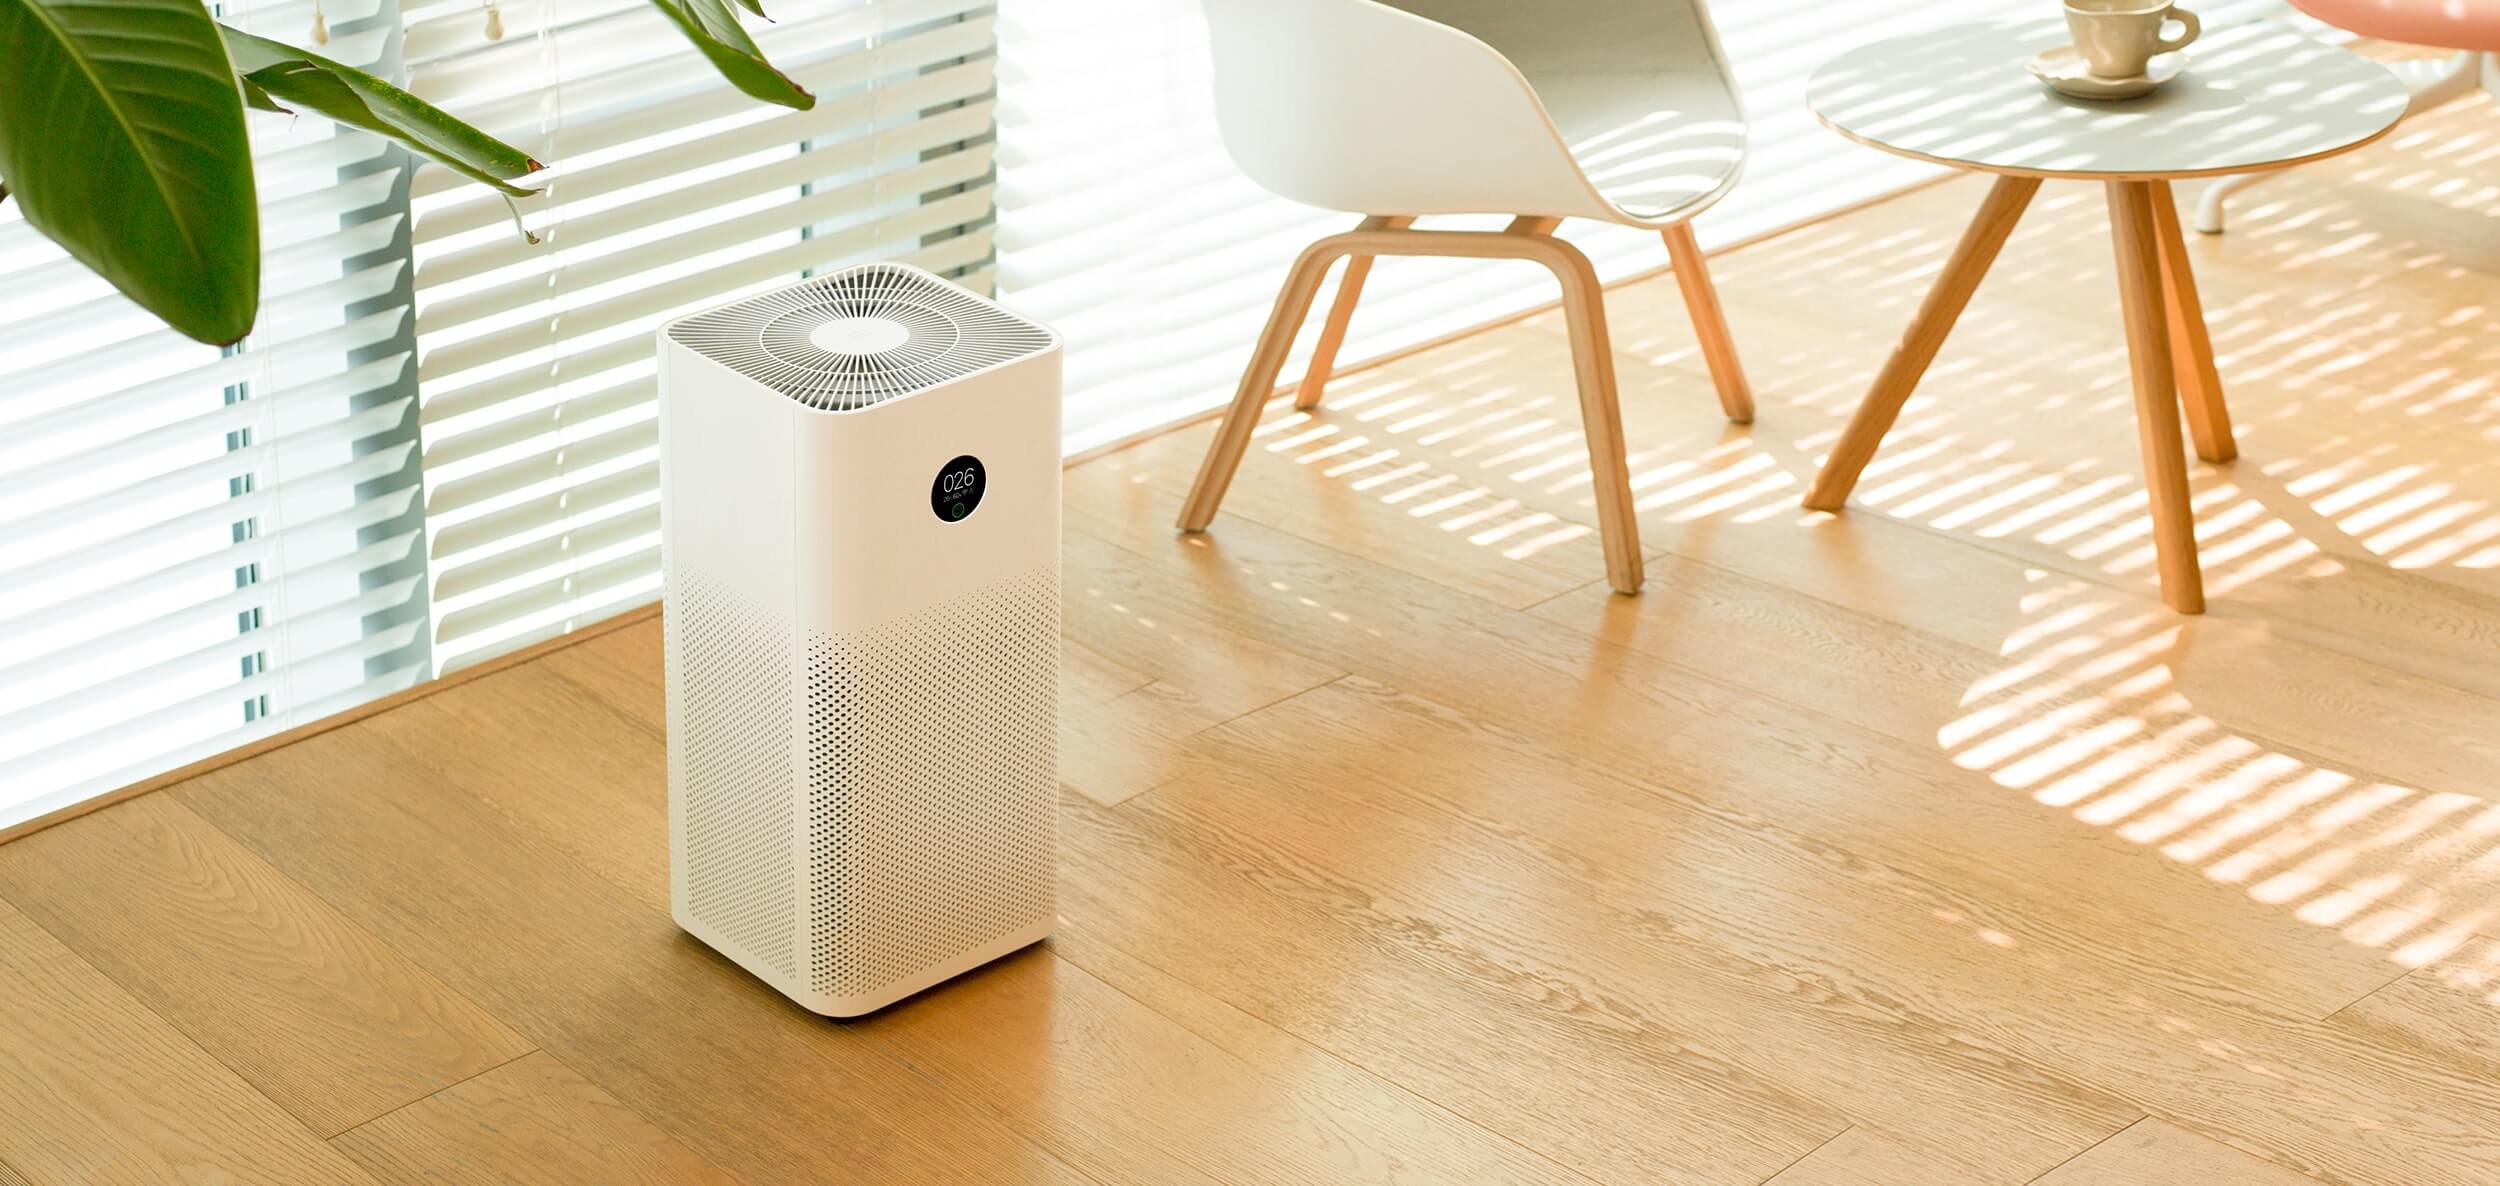 Air purifiers have many types from many brands and different prices